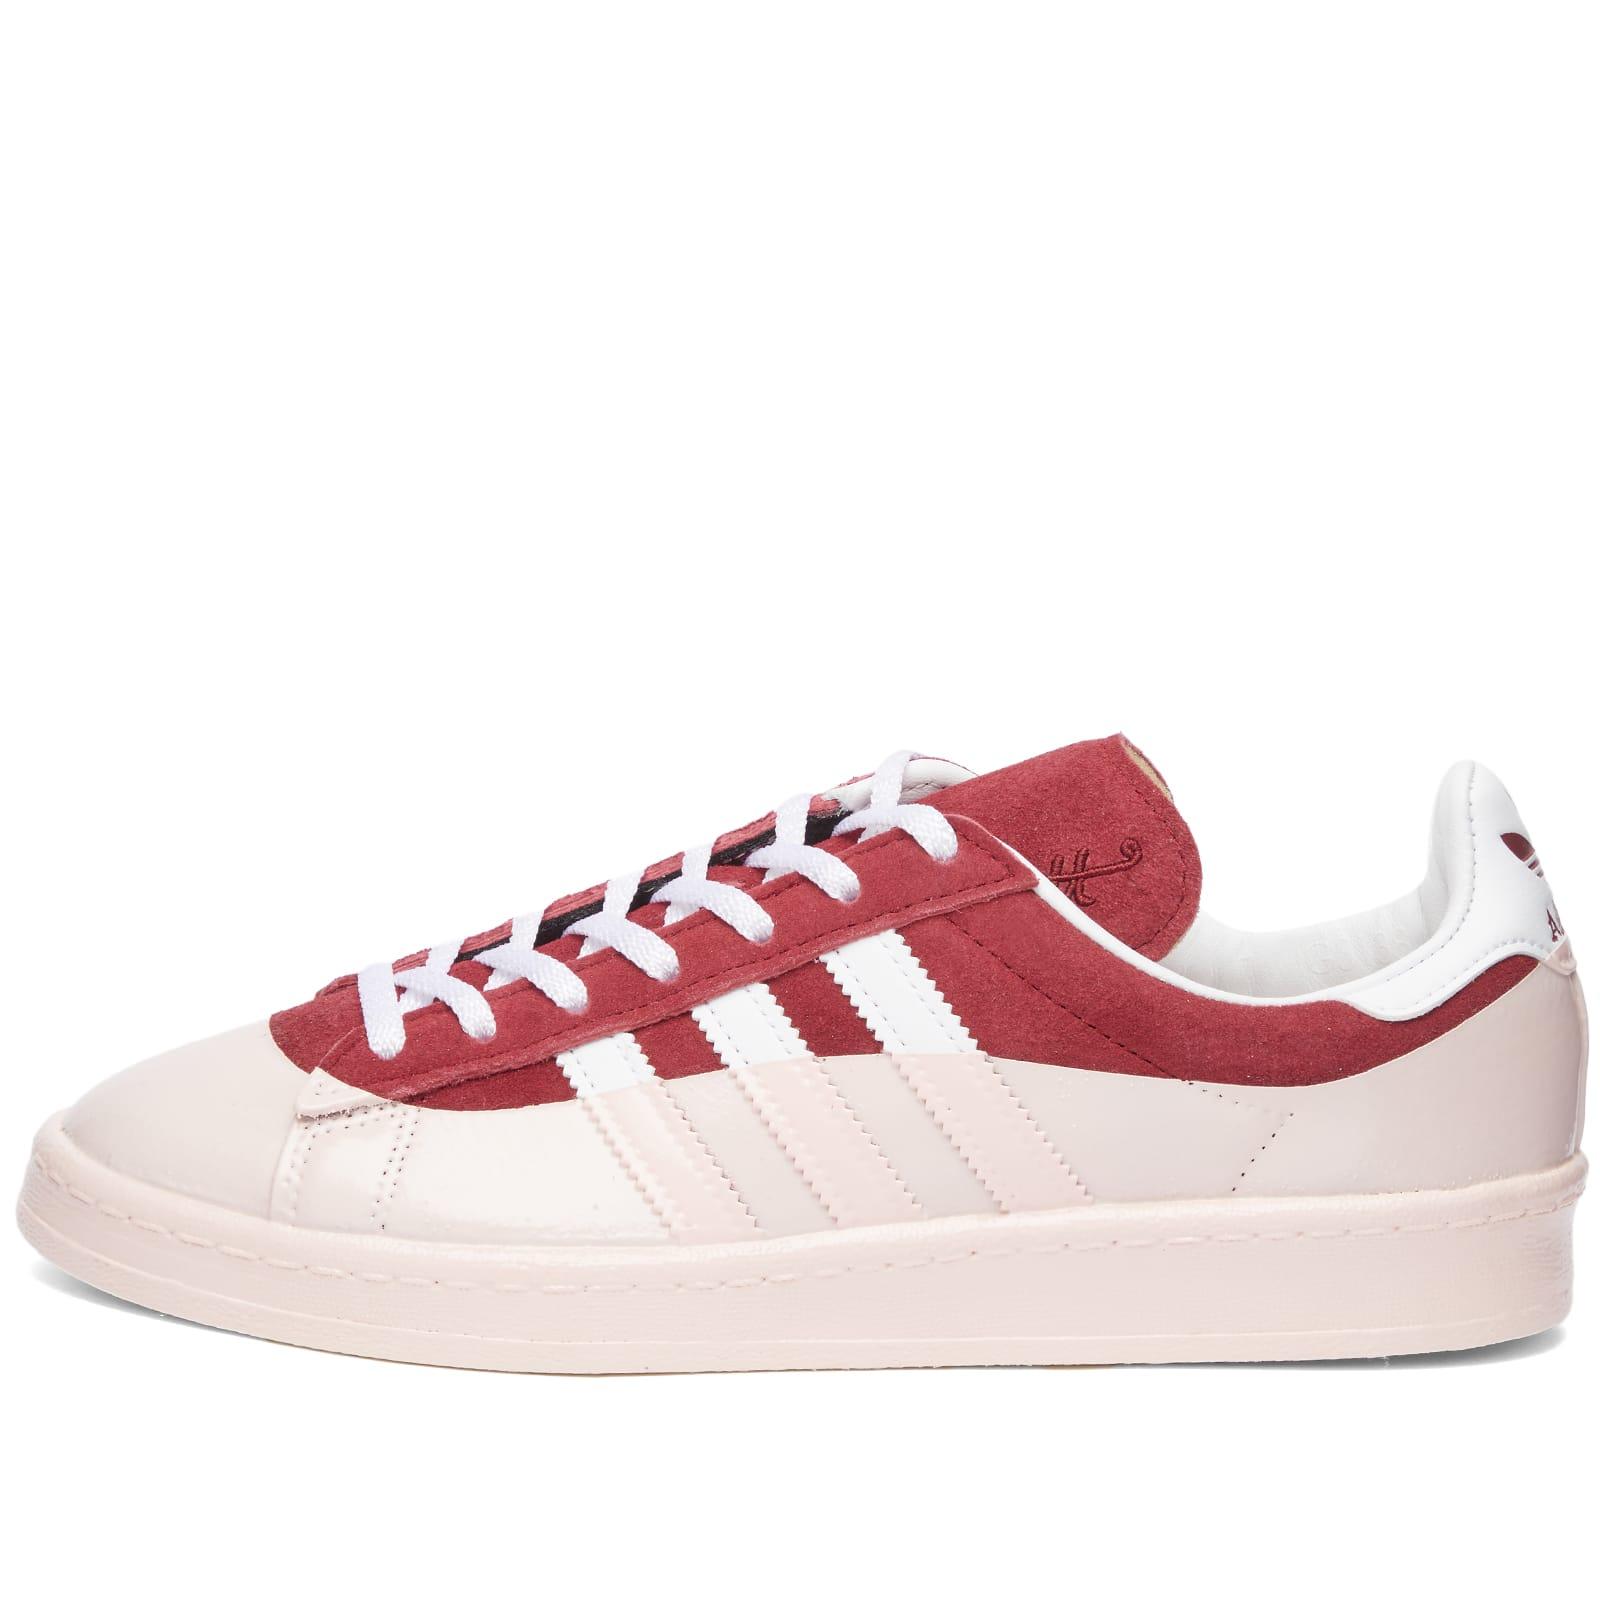 adidas X Cali Dewitt Campus 80s Sneakers in Pink | Lyst